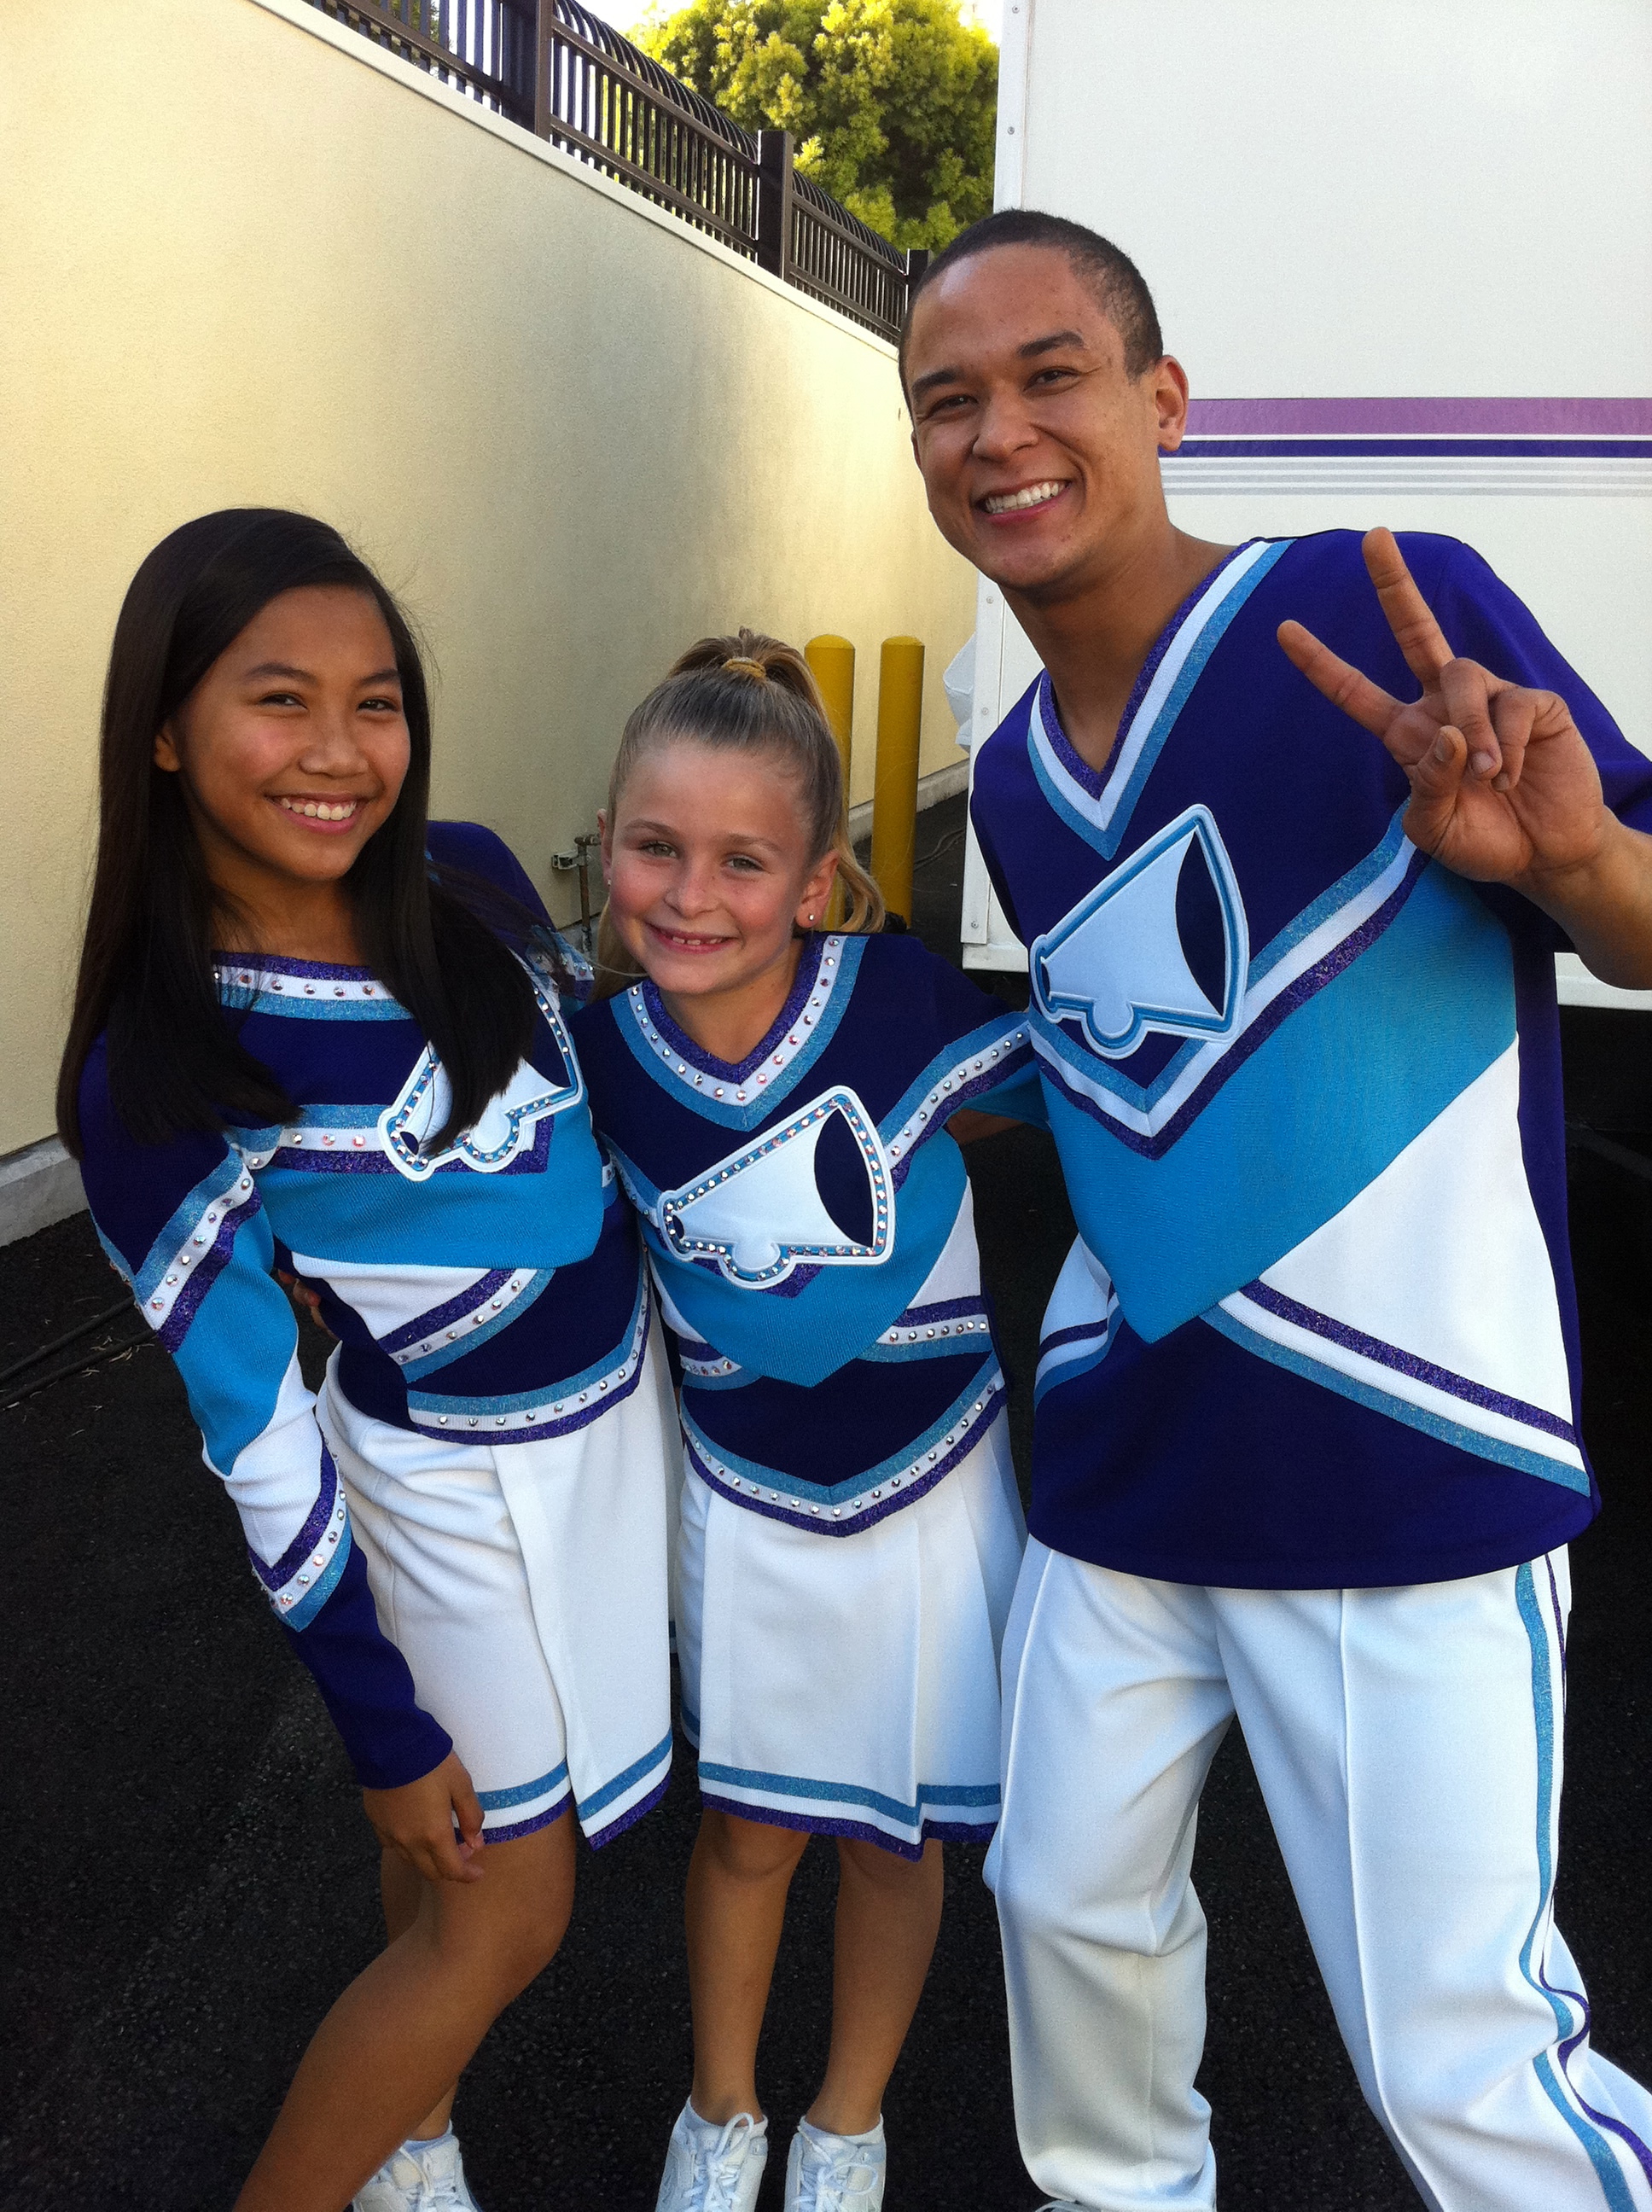 on the set of Fresh Beat Band (Nickelodeon) in cheer uniforms!